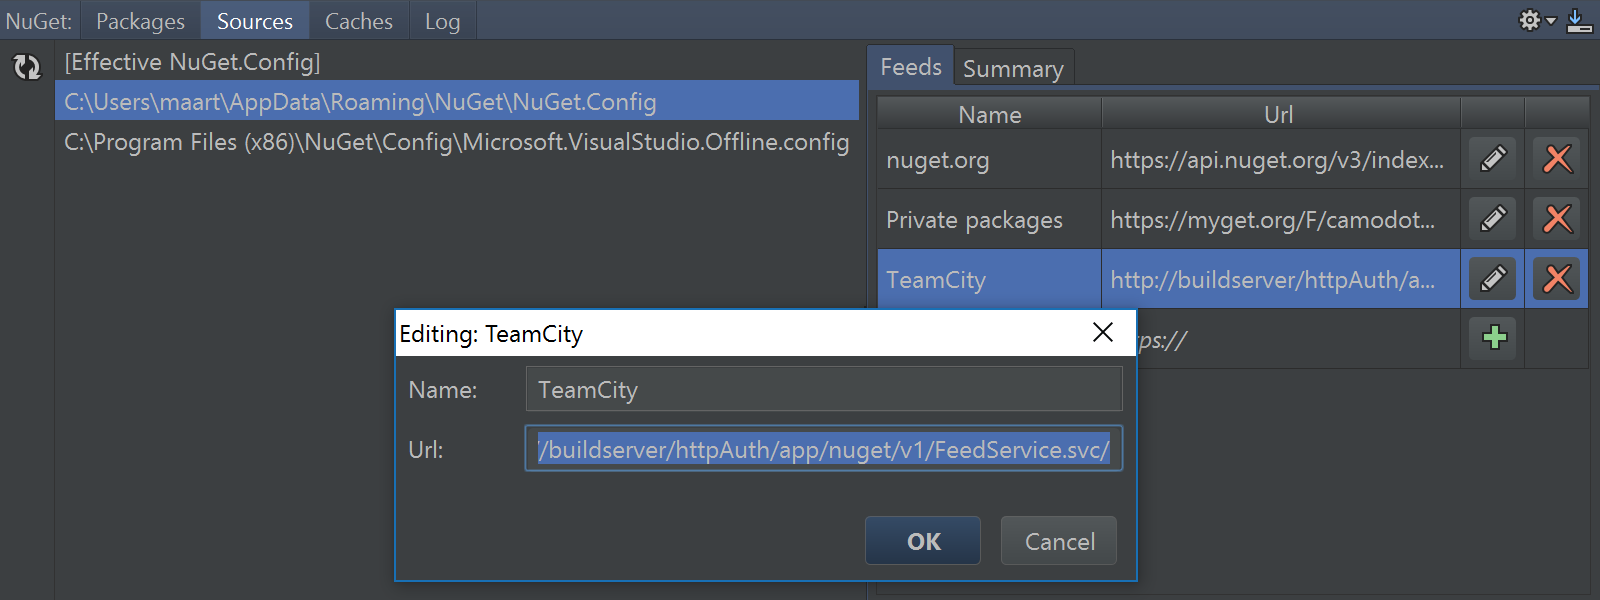 Edit NuGet package sources from the UI